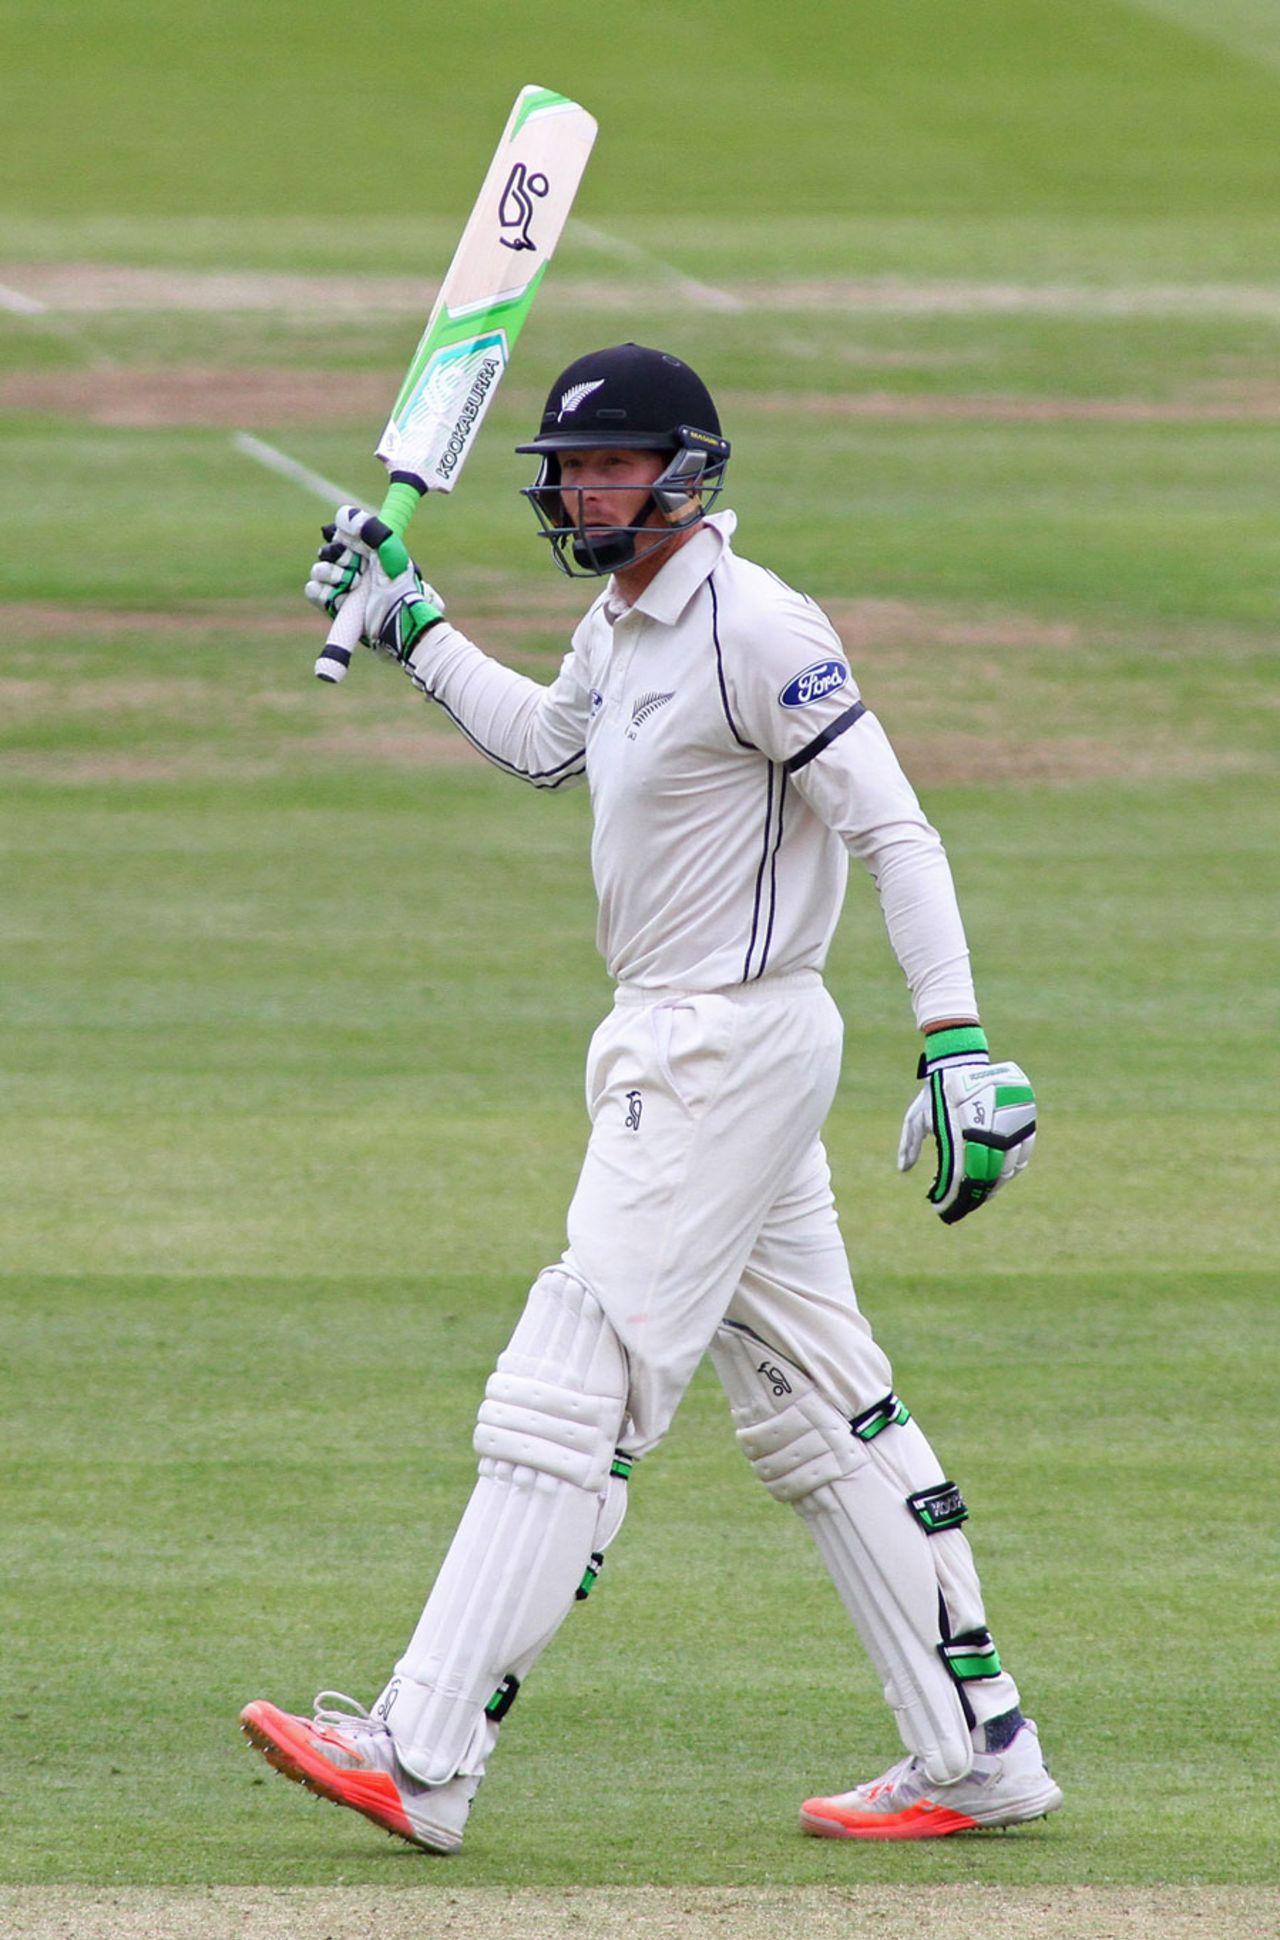 Martin Guptill raises his bat on reaching fifty, England v New Zealand, 1st Investec Test, Lord's, 2nd day, May 22, 2015